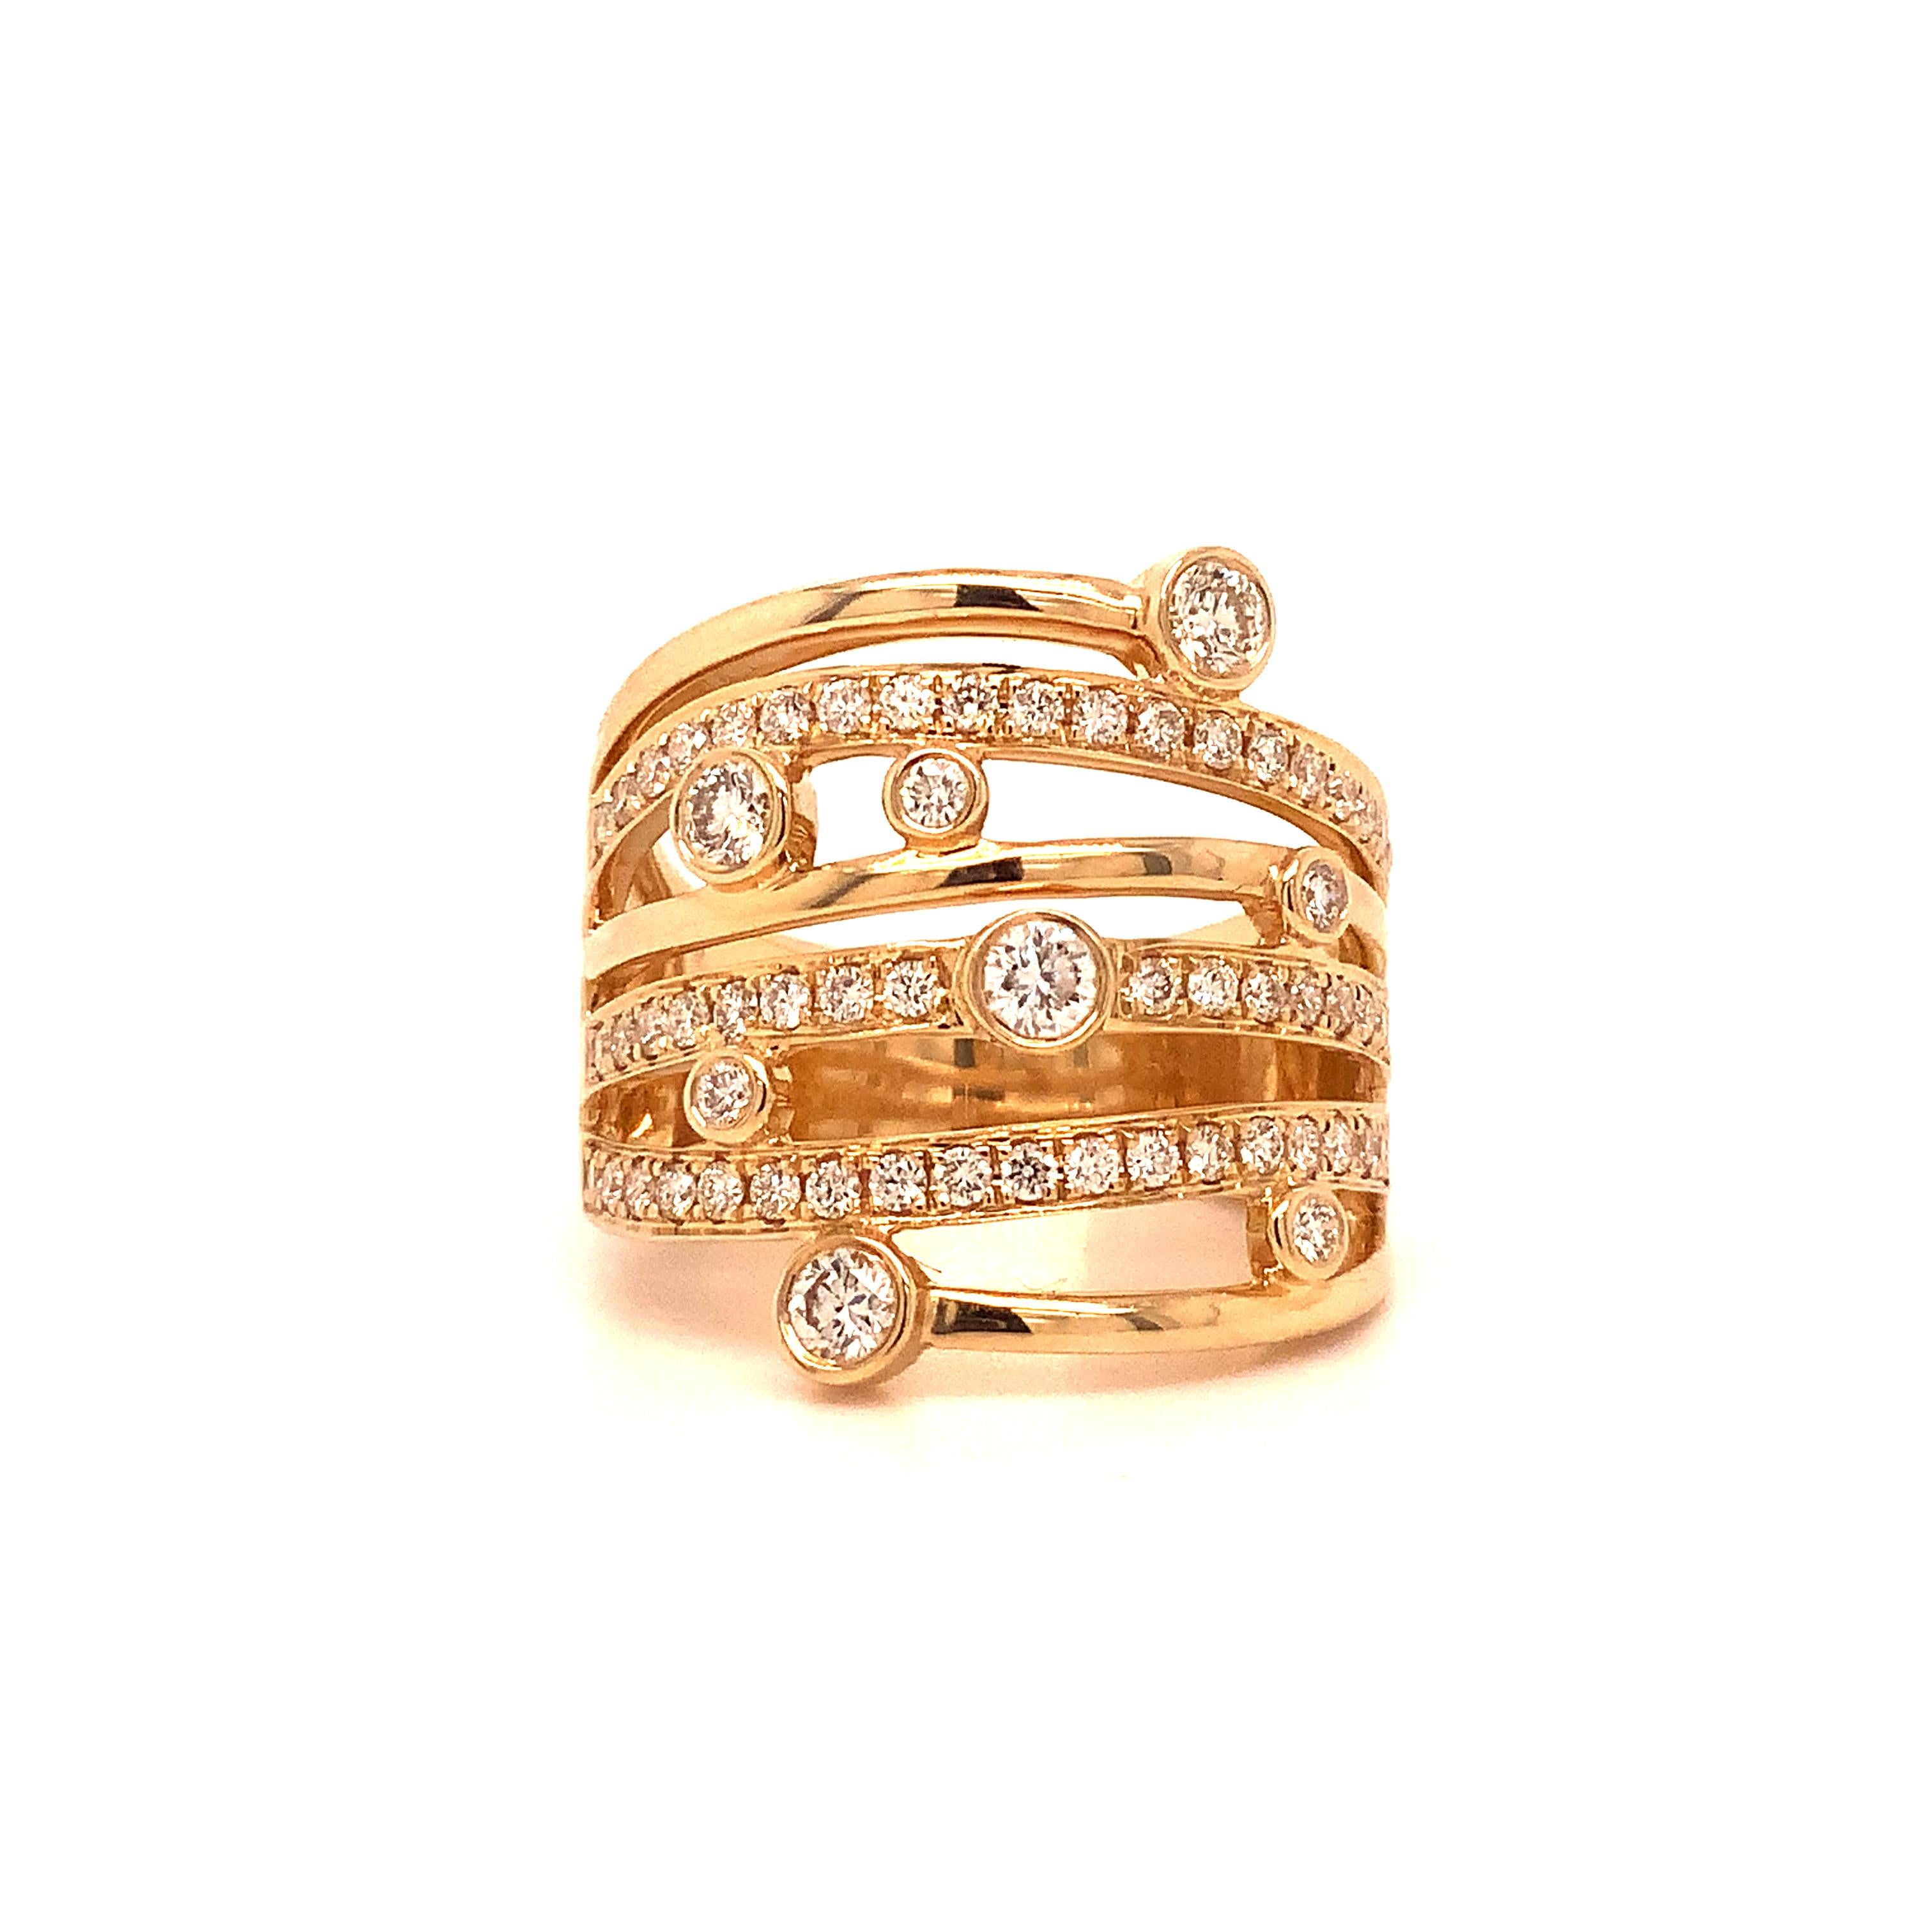 Roman + Jules Right Hand Diamond Ring Set in 14 Karat Yellow Gold.
This 6 row multi-band with a negative space design has a low profile making it easy to wear everyday.
4 Round Brilliant Cut Diamonds = 0.28 cts t.w. Bezel Set. 
58 Round Brilliant